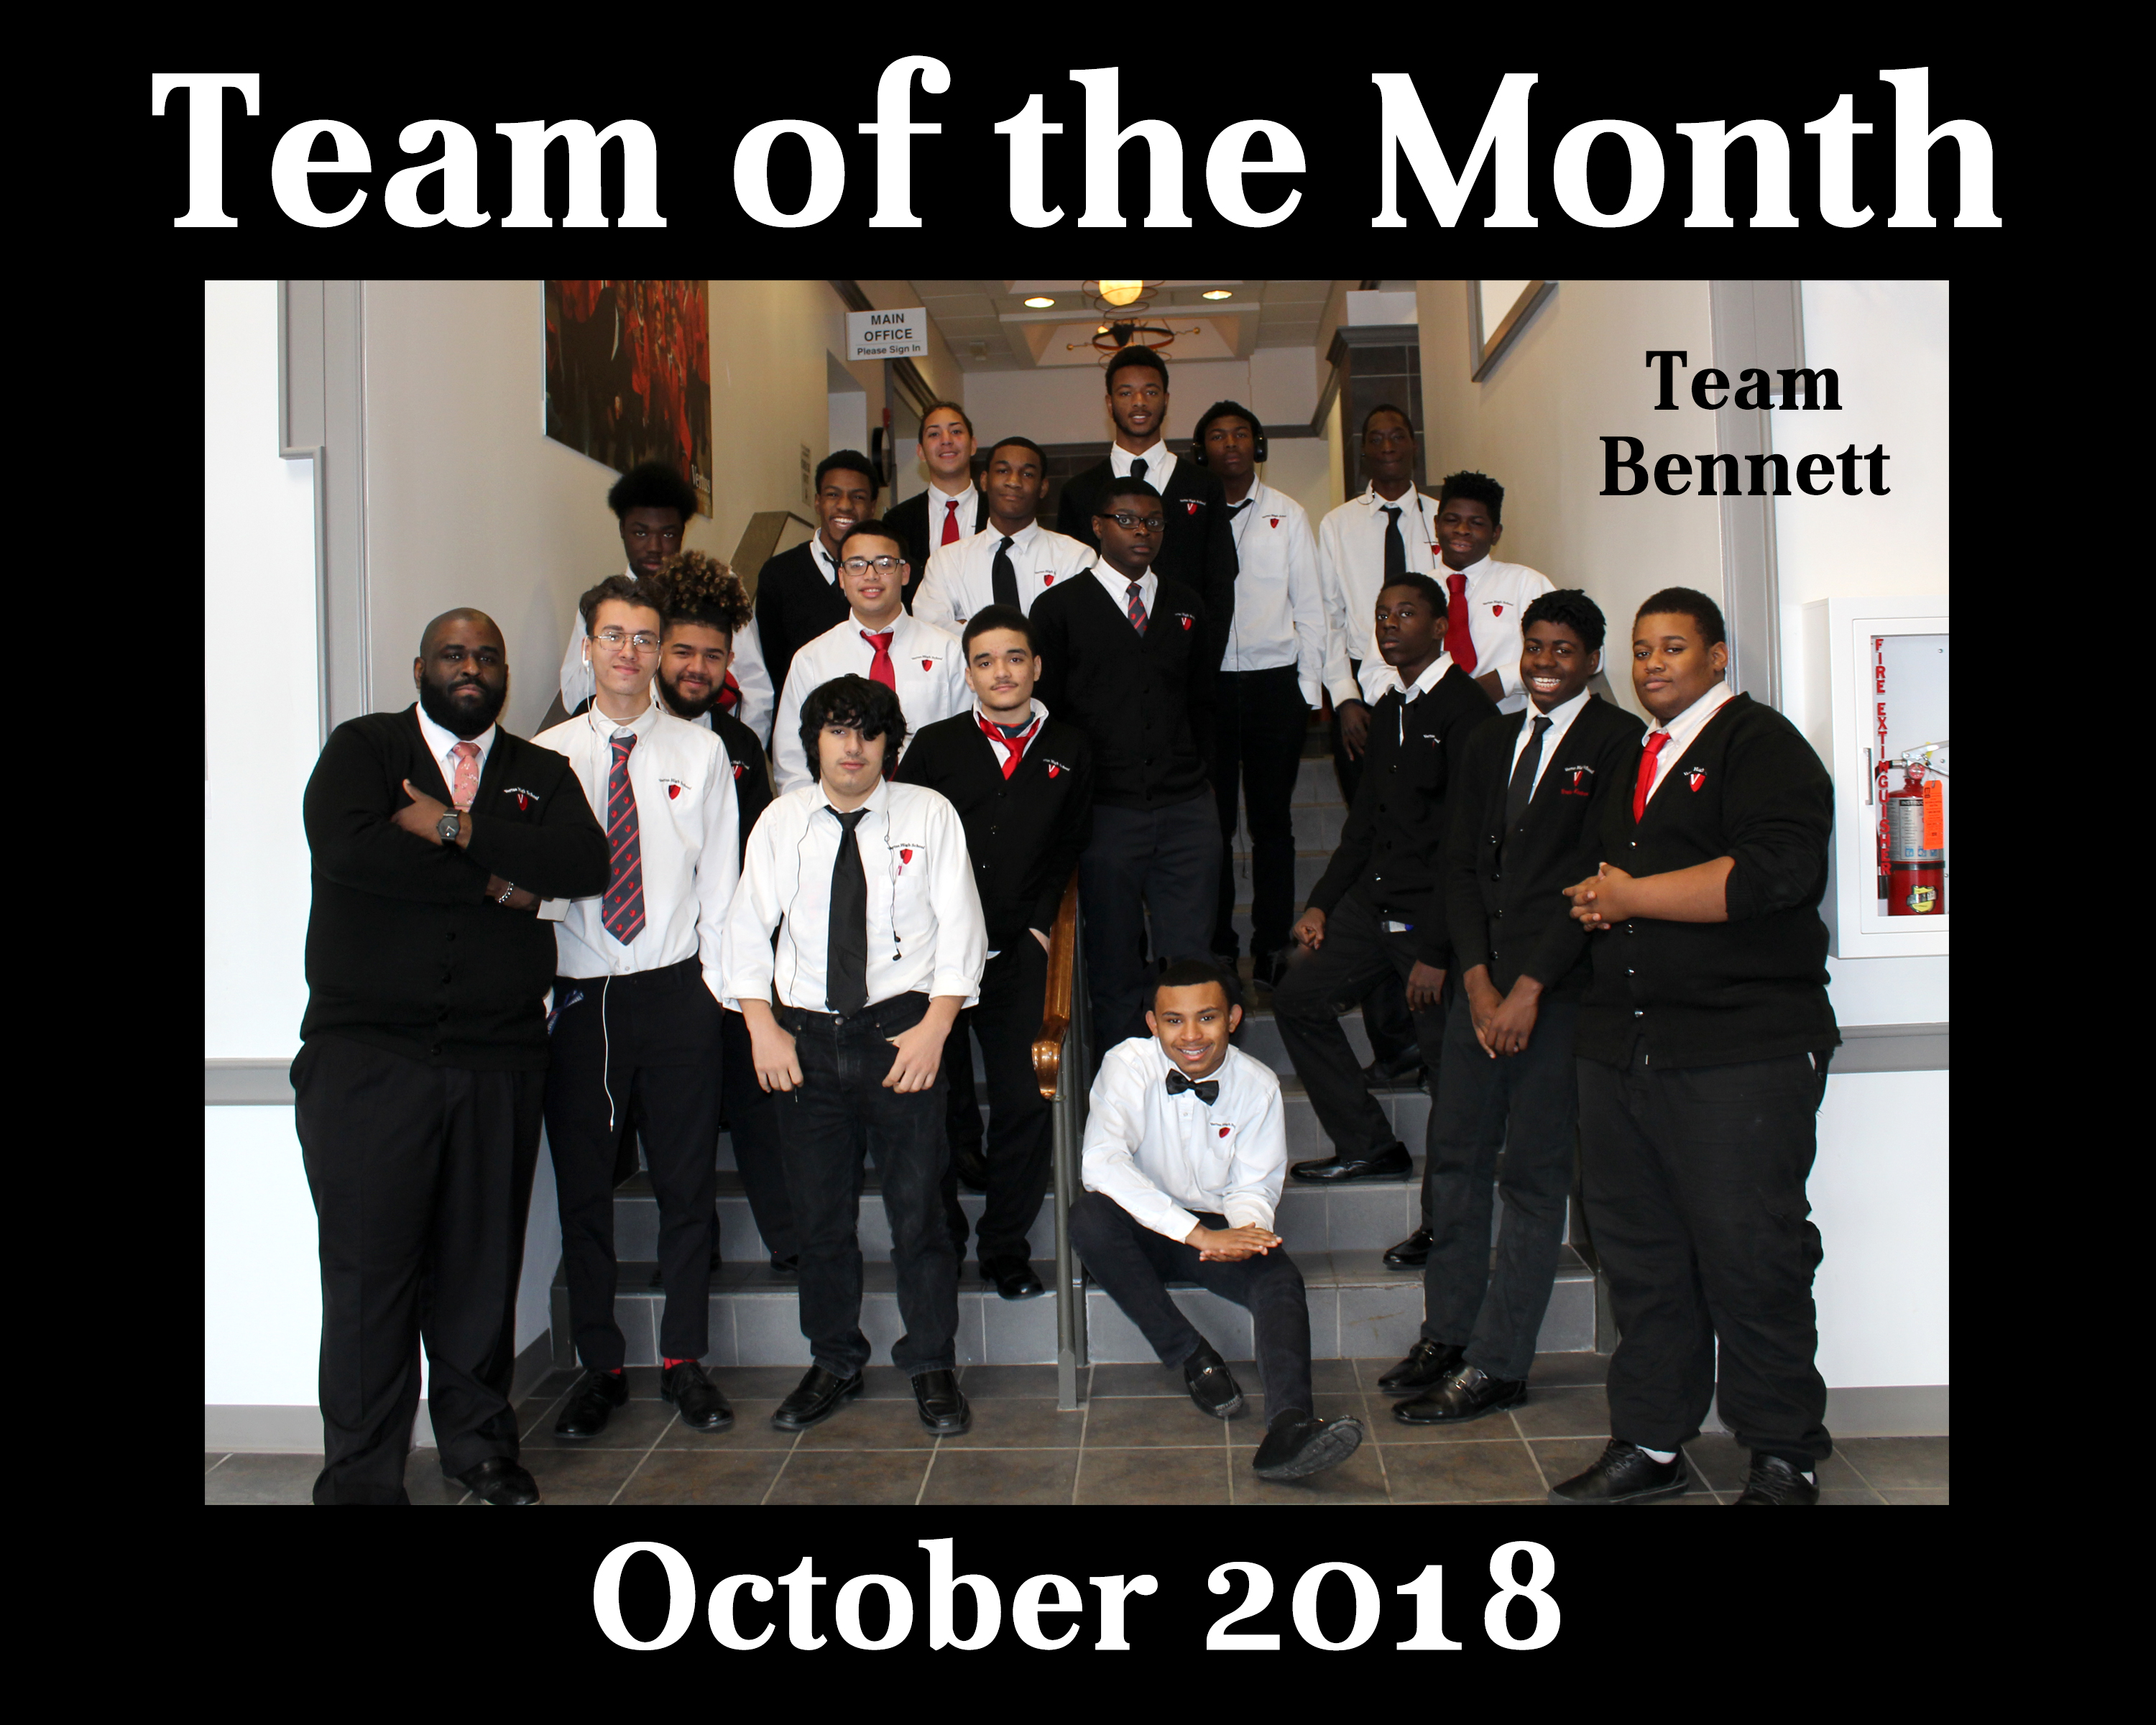 Team of the Month - October 2018